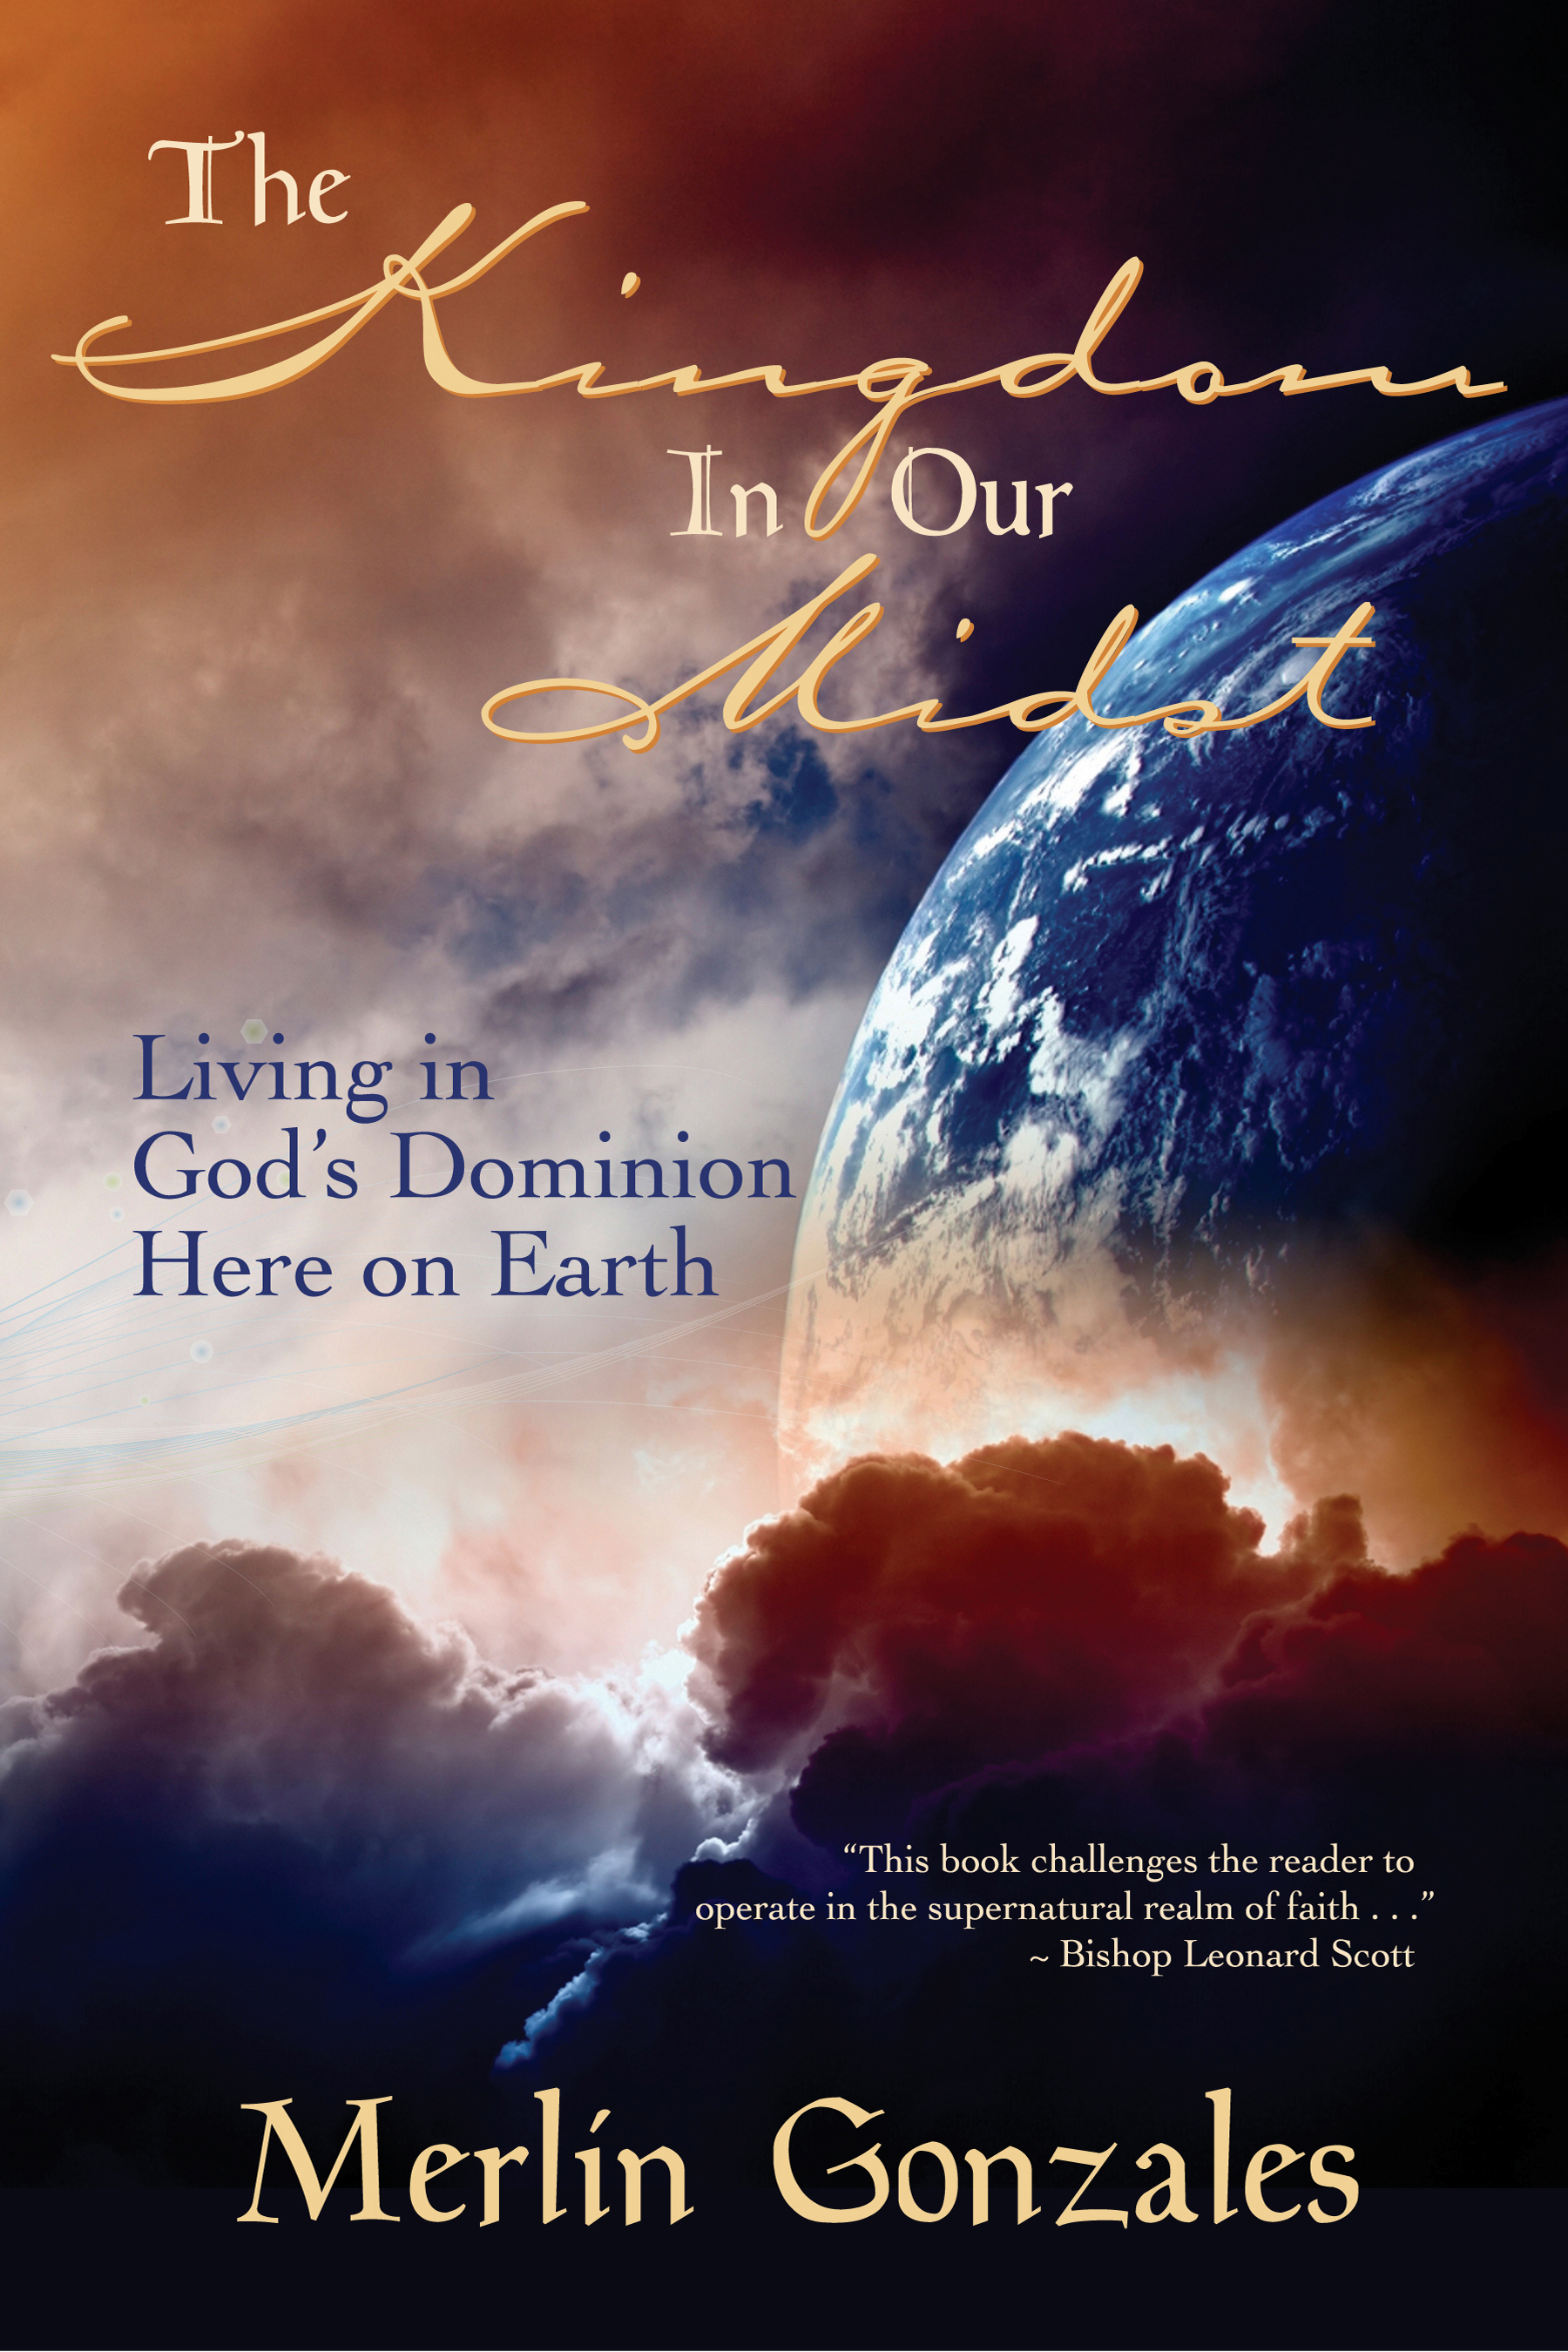 Living in God's Dominion here on earth